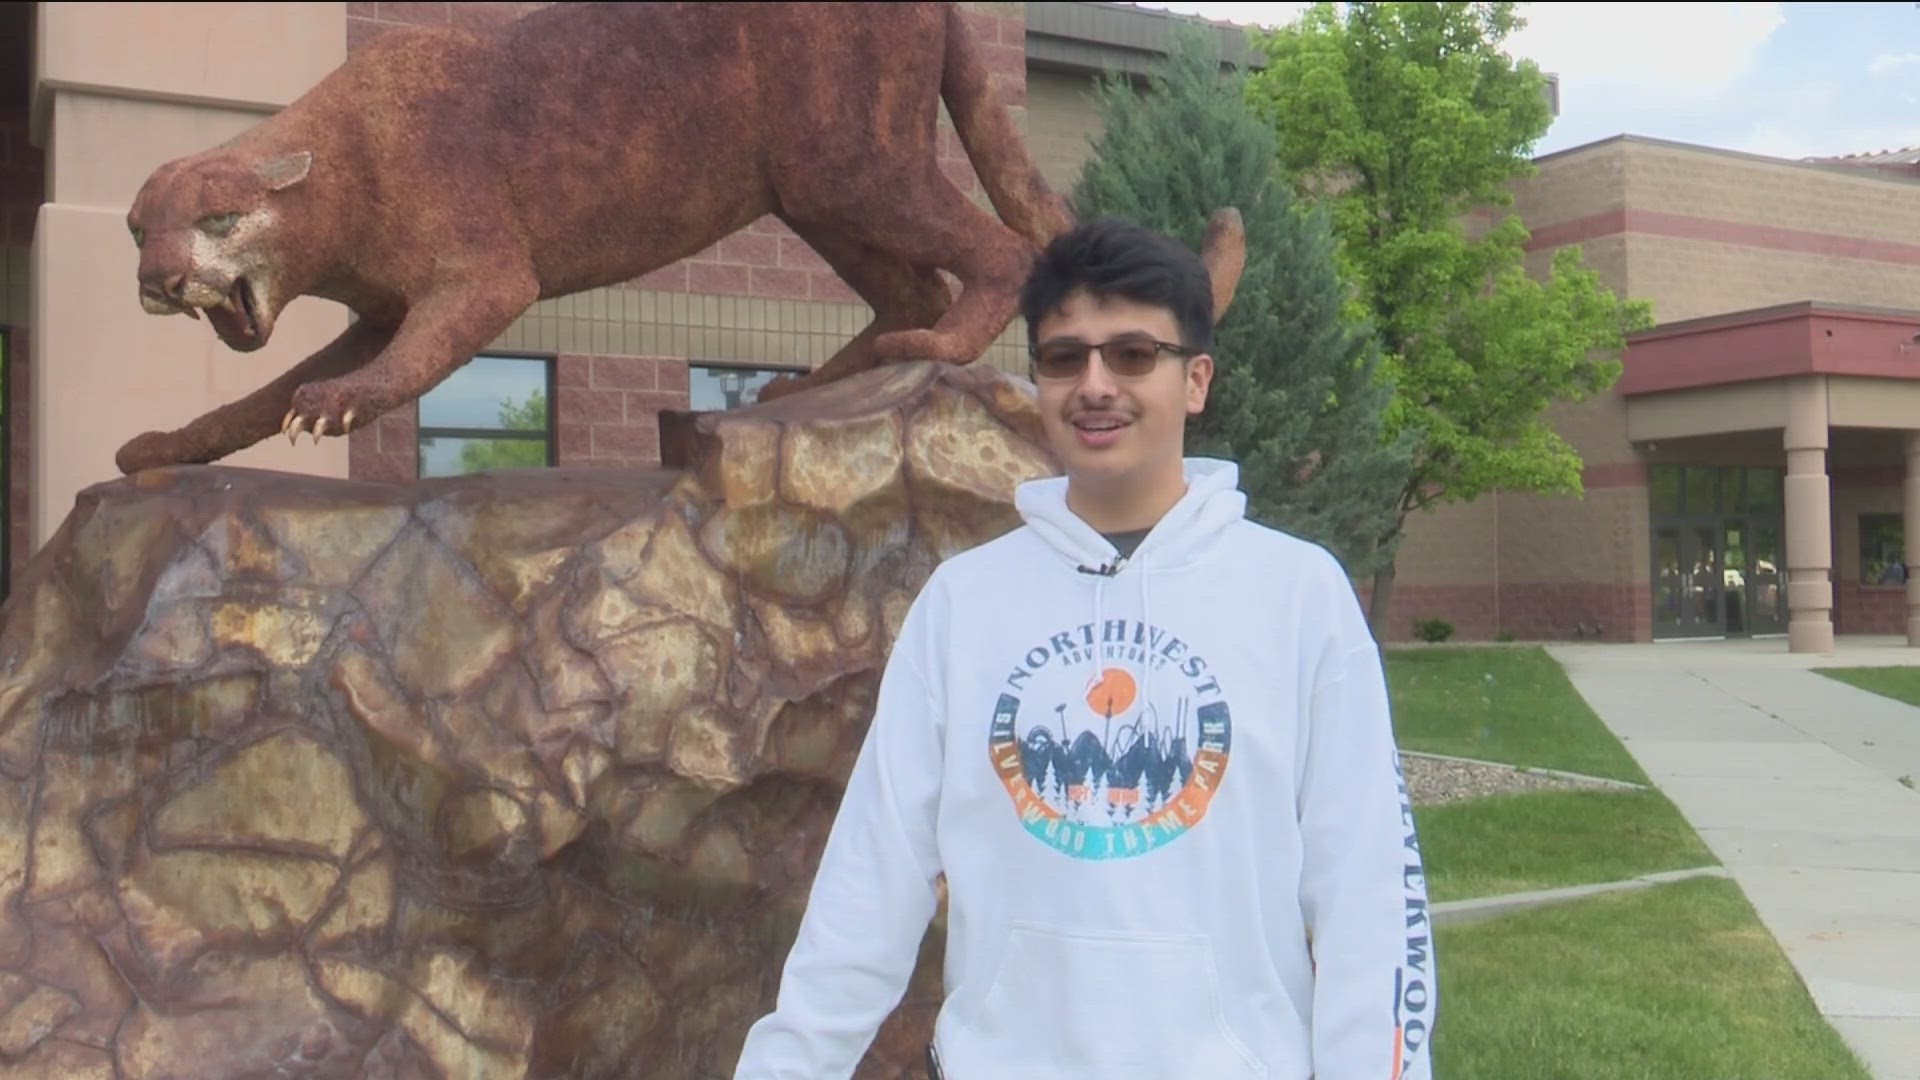 Caldwell High School student, Nick Mendez is reaching for the stars this summer, as he will be one of three Idaho high school students interning for NASA.